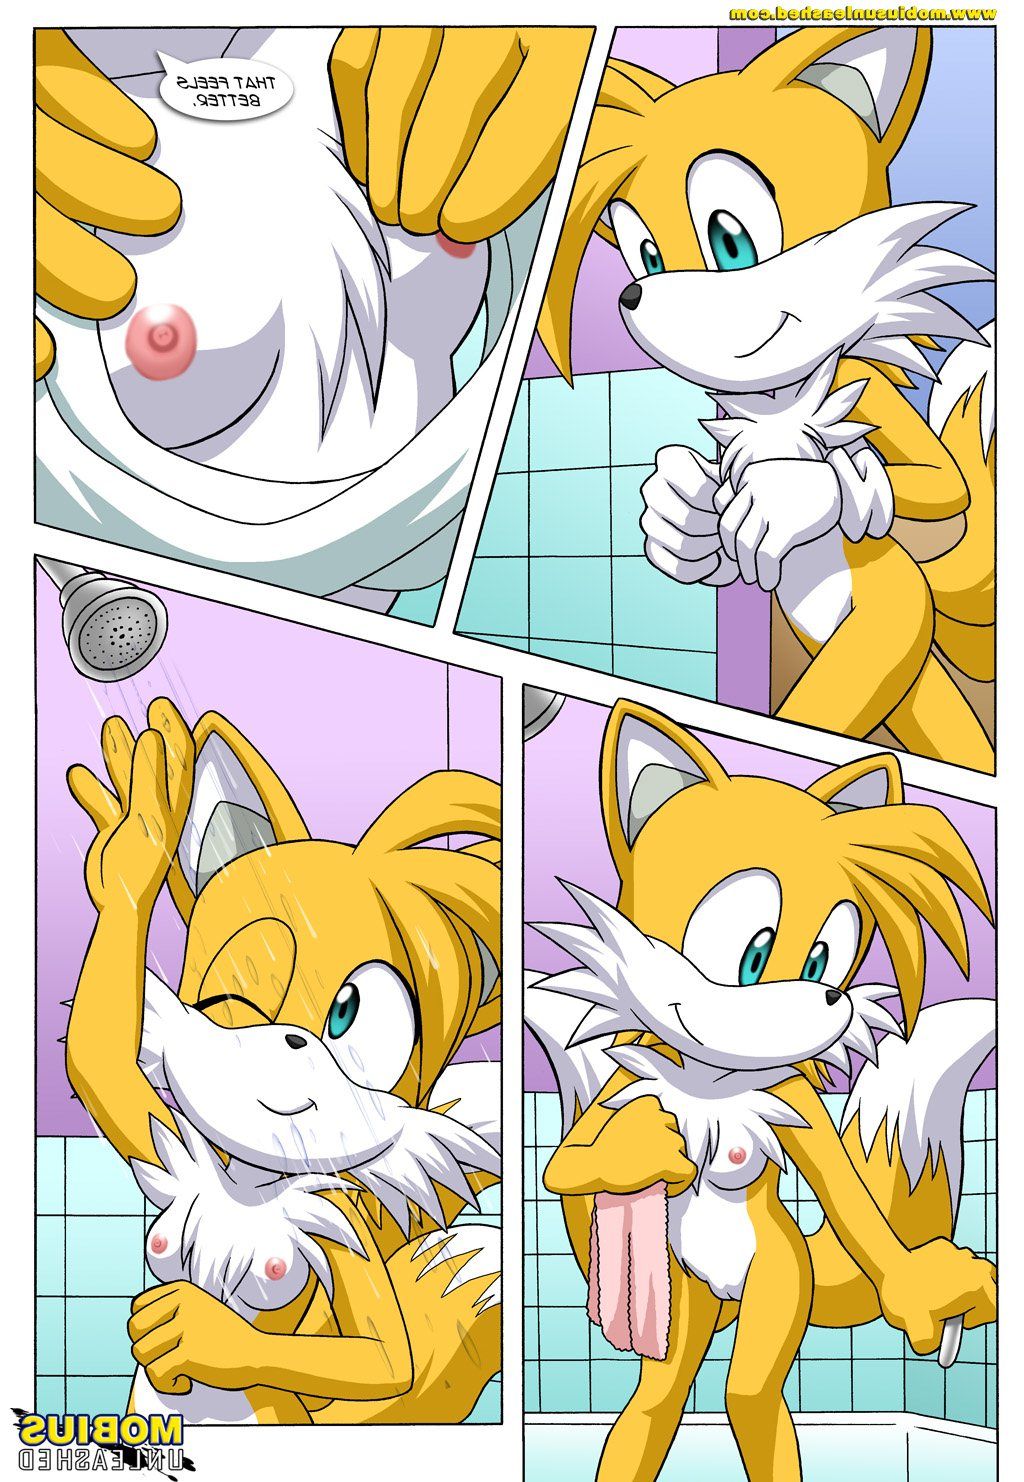 pal-comix-tails-tales image_13445.jpg